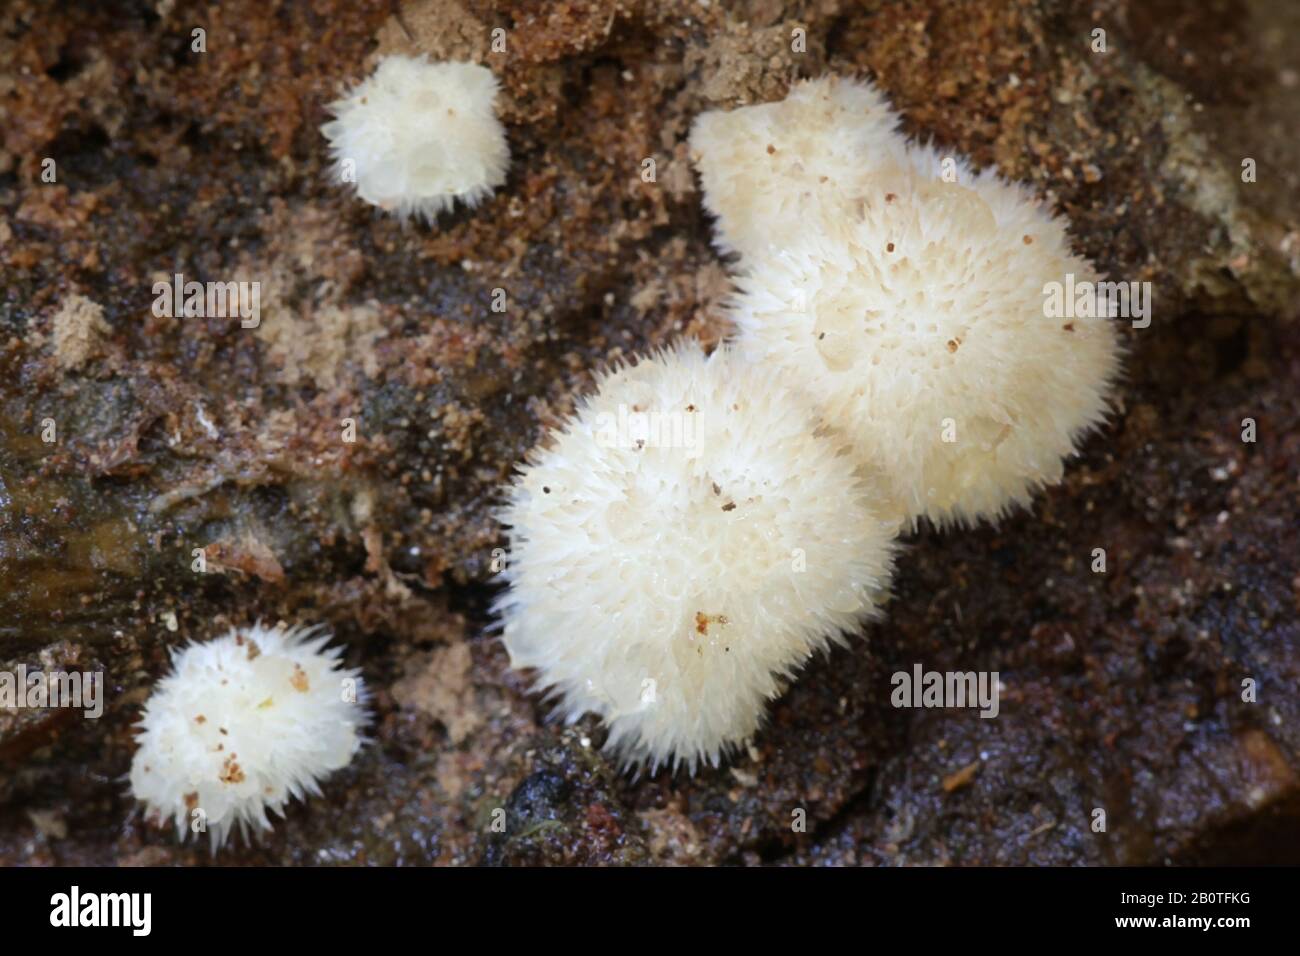 Postia ptychogaster, known as the powderpuff bracket, strange fungus from Finland Stock Photo